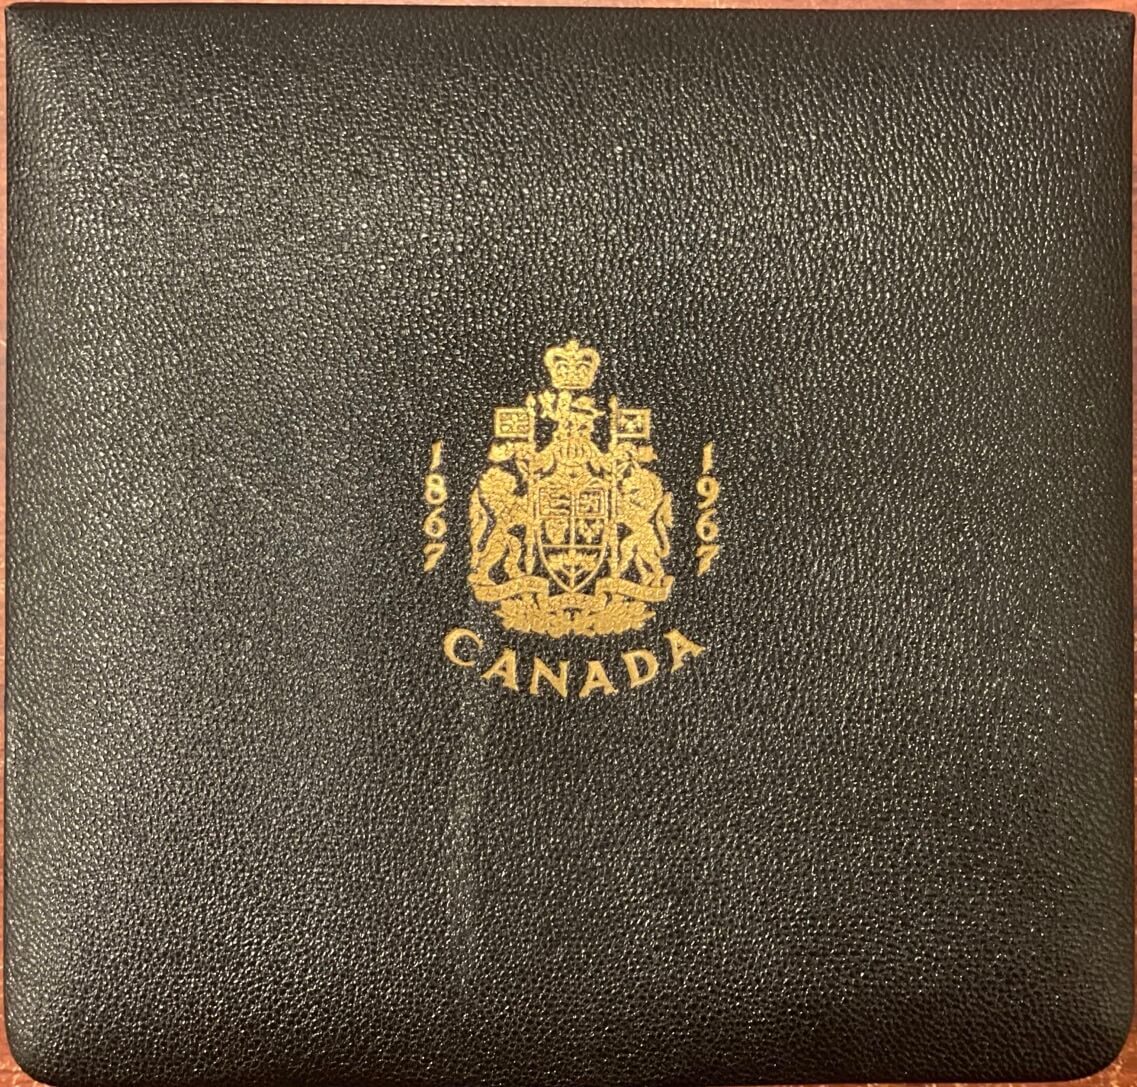 Canada 1967 Proof 7 Coin Set Centennial product image